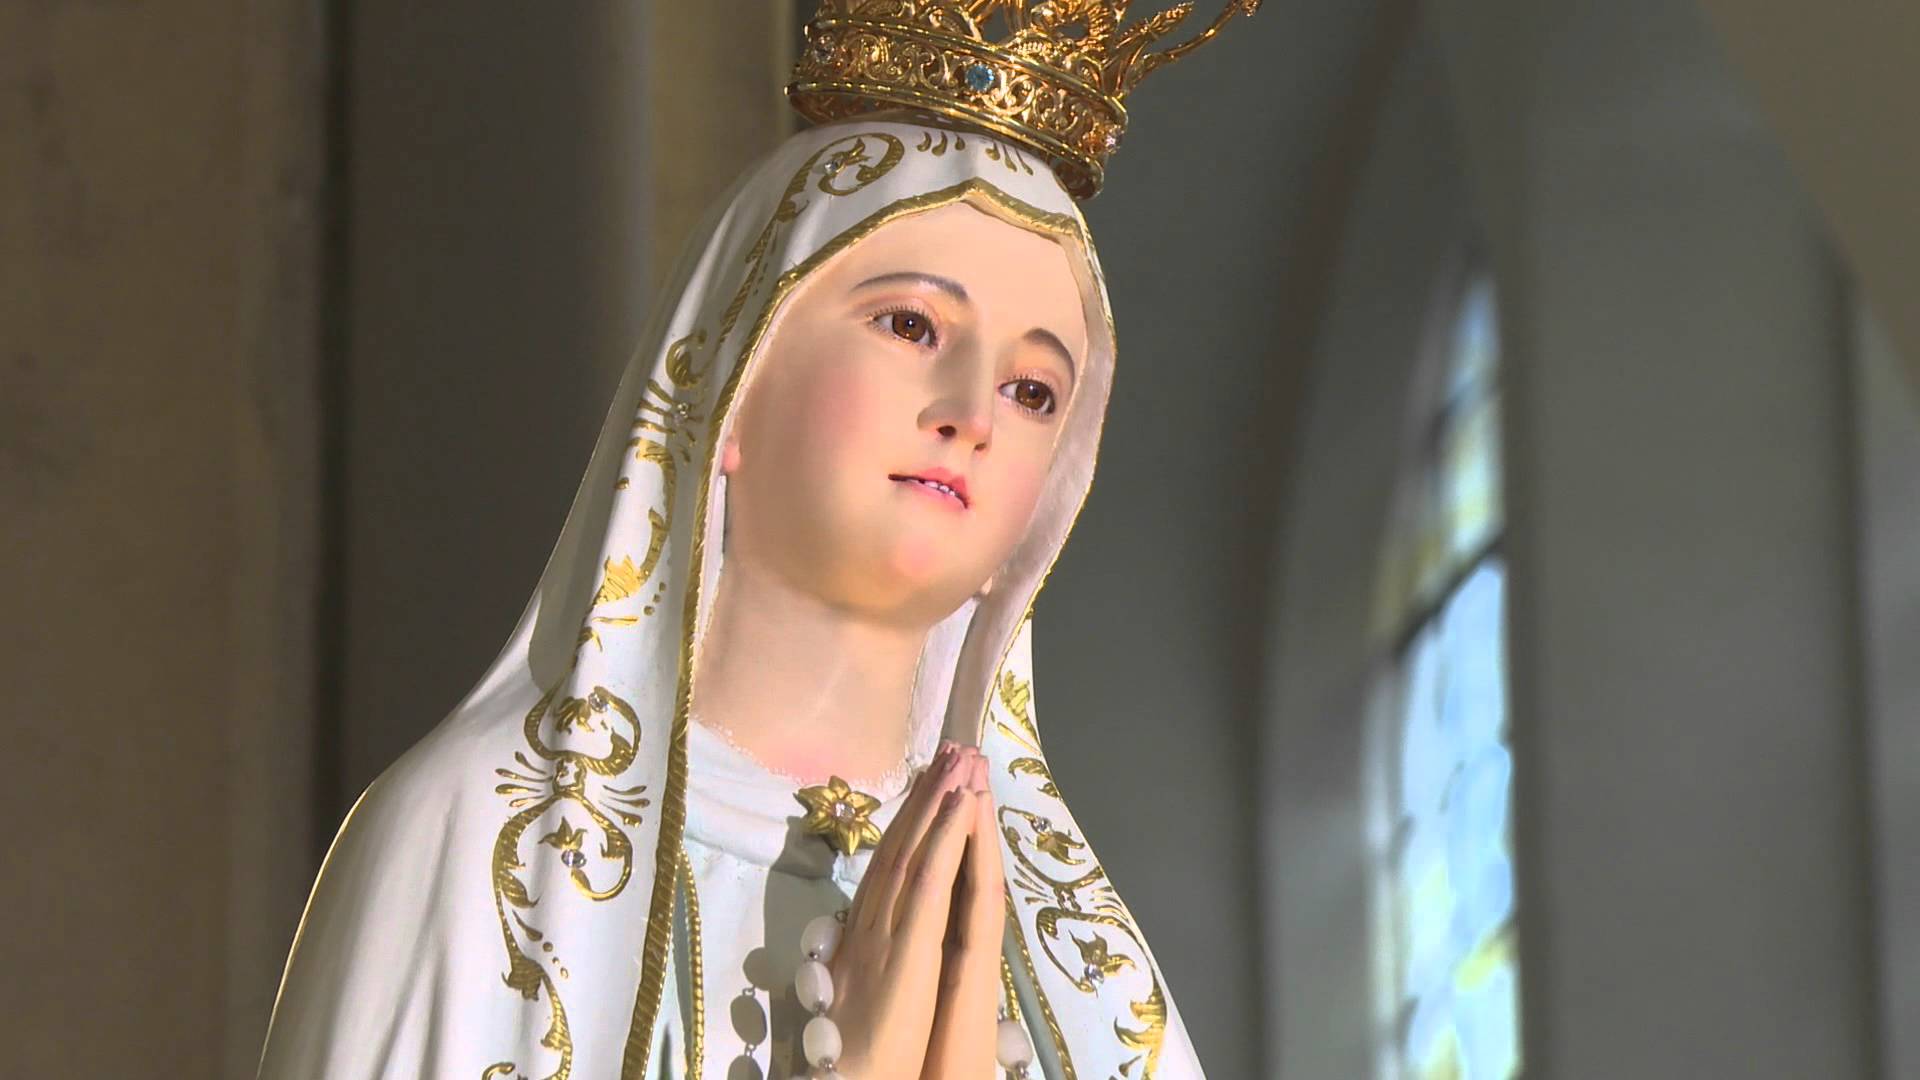 Happy Birthday, Dear Mother: sung by the congregation for Our Lady's